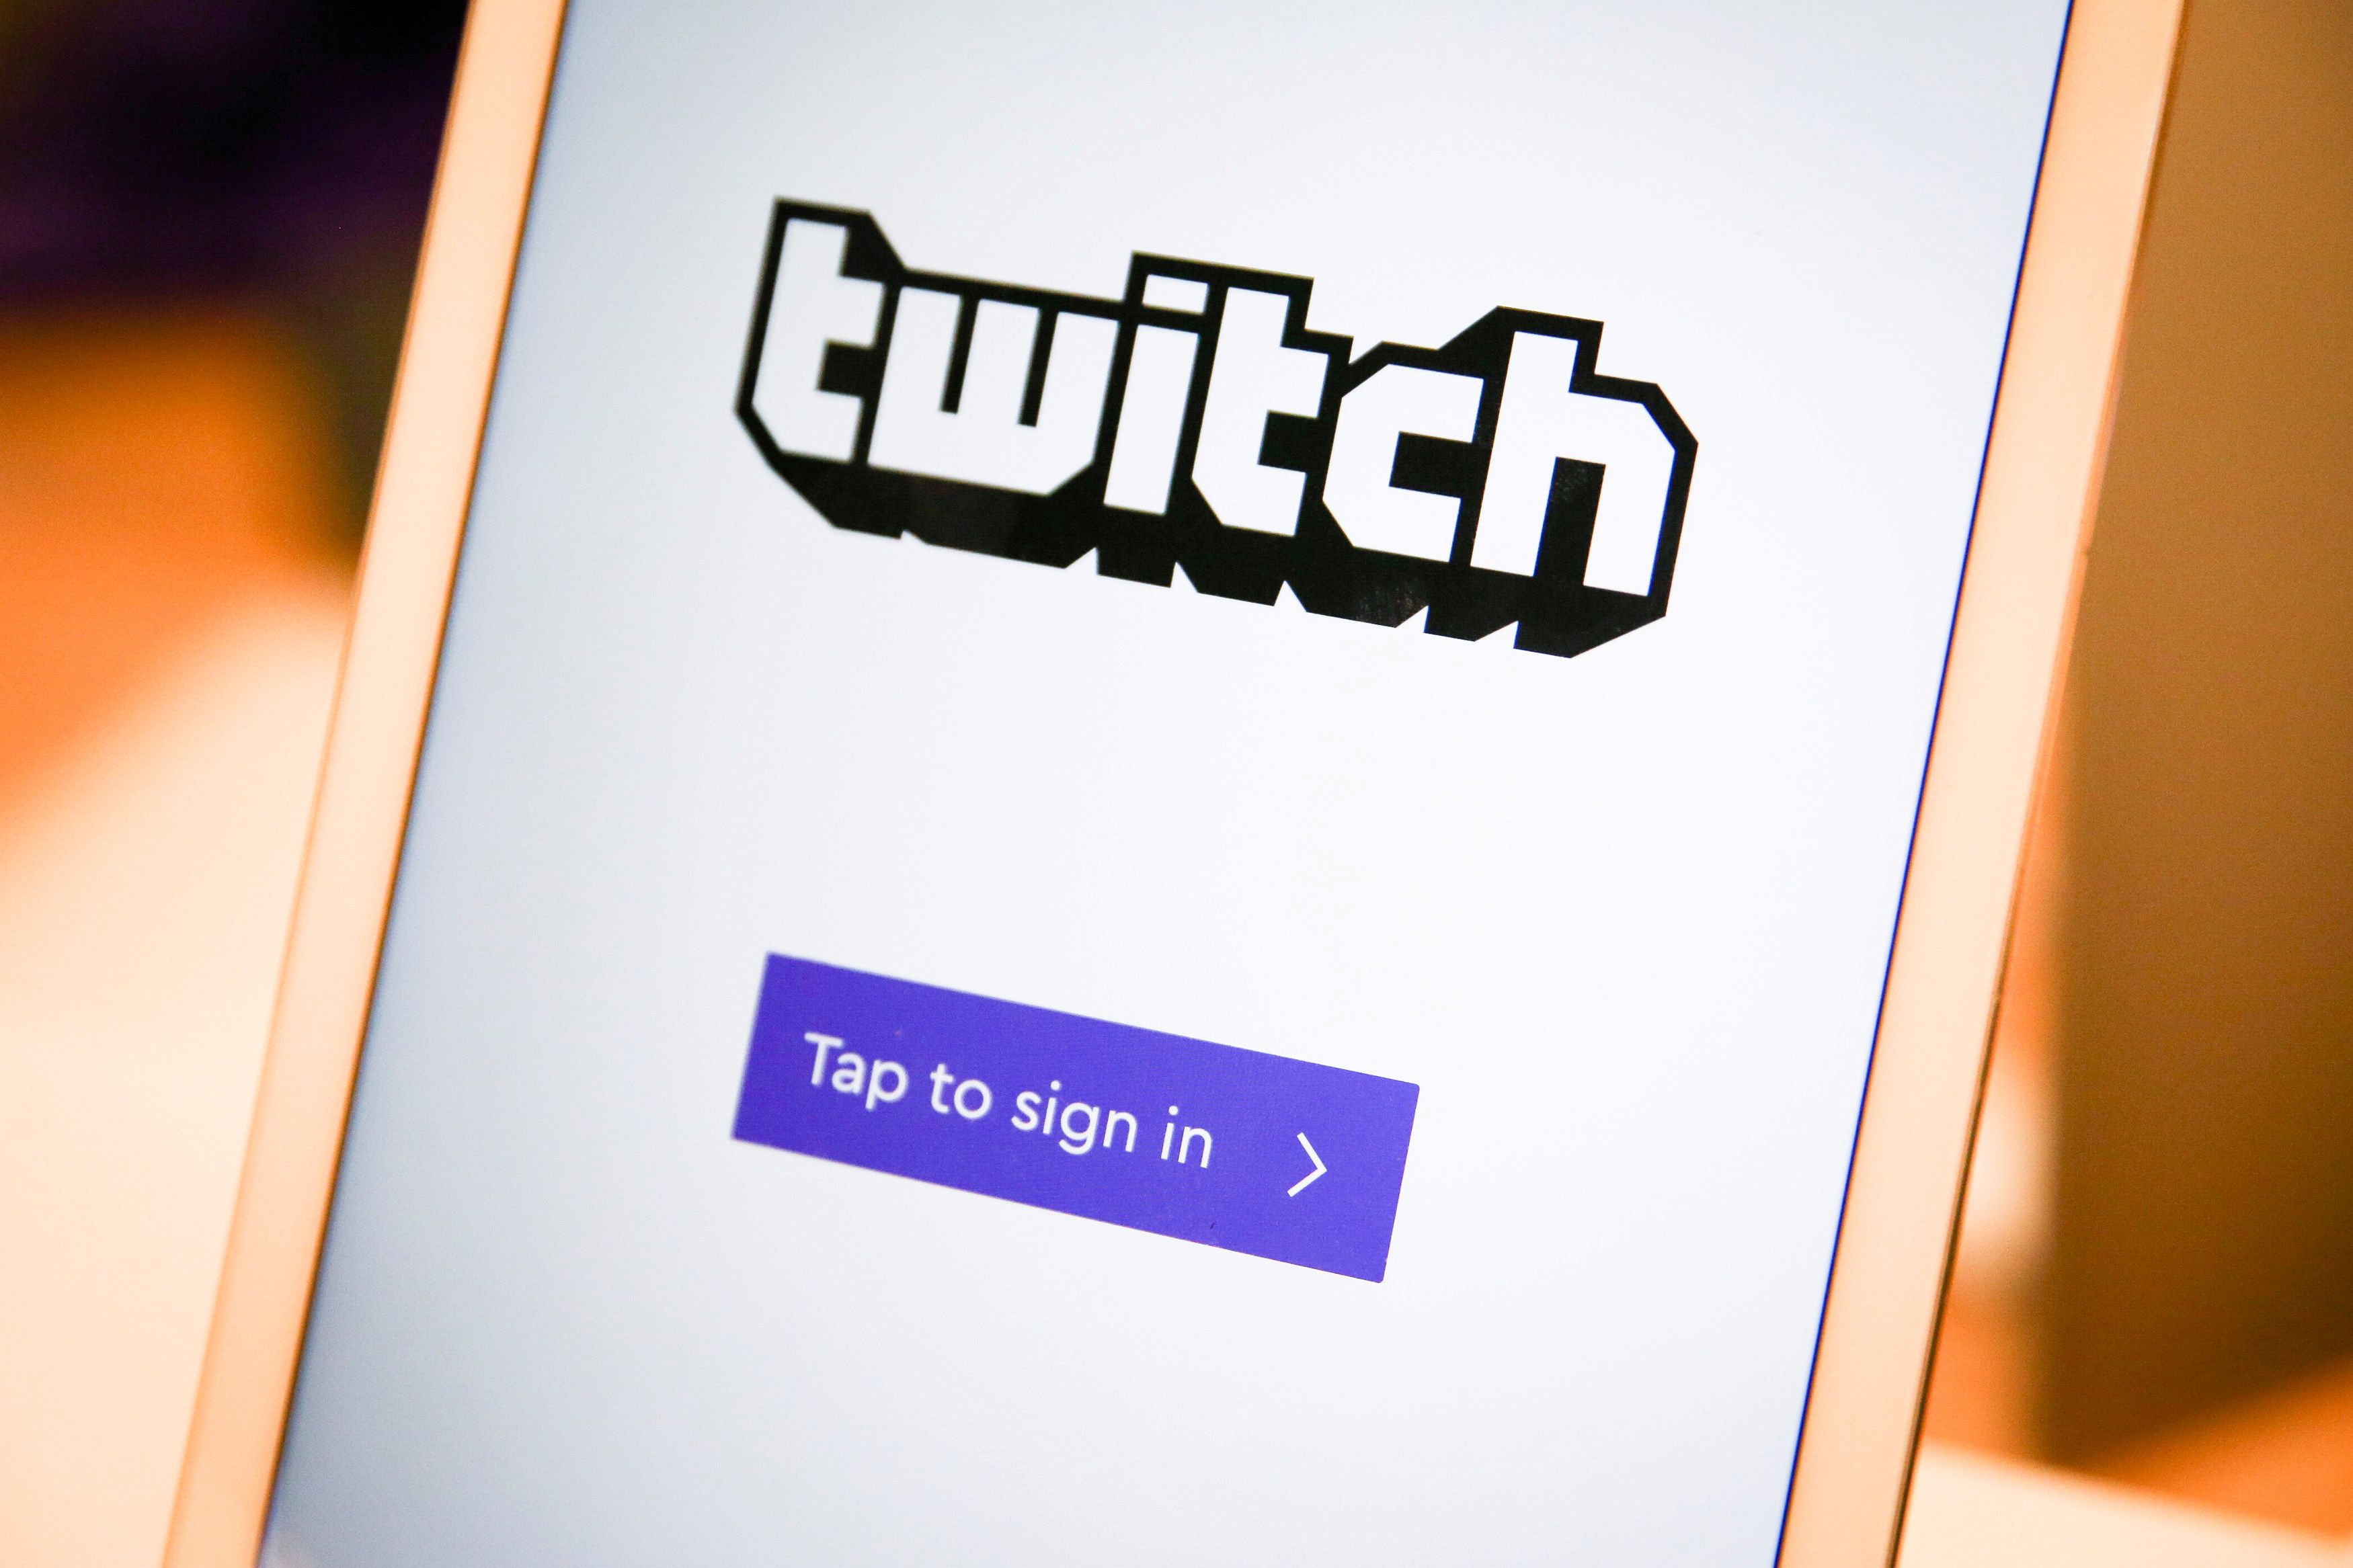 FILE PHOTO: A twitch sign-in screen is seen at the offices of Twitch Interactive Inc, a social video platform and gaming community owned by Amazon, in San Francisco, California, U.S., March 6, 2017. REUTERS/Elijah Nouvelage/File Photo